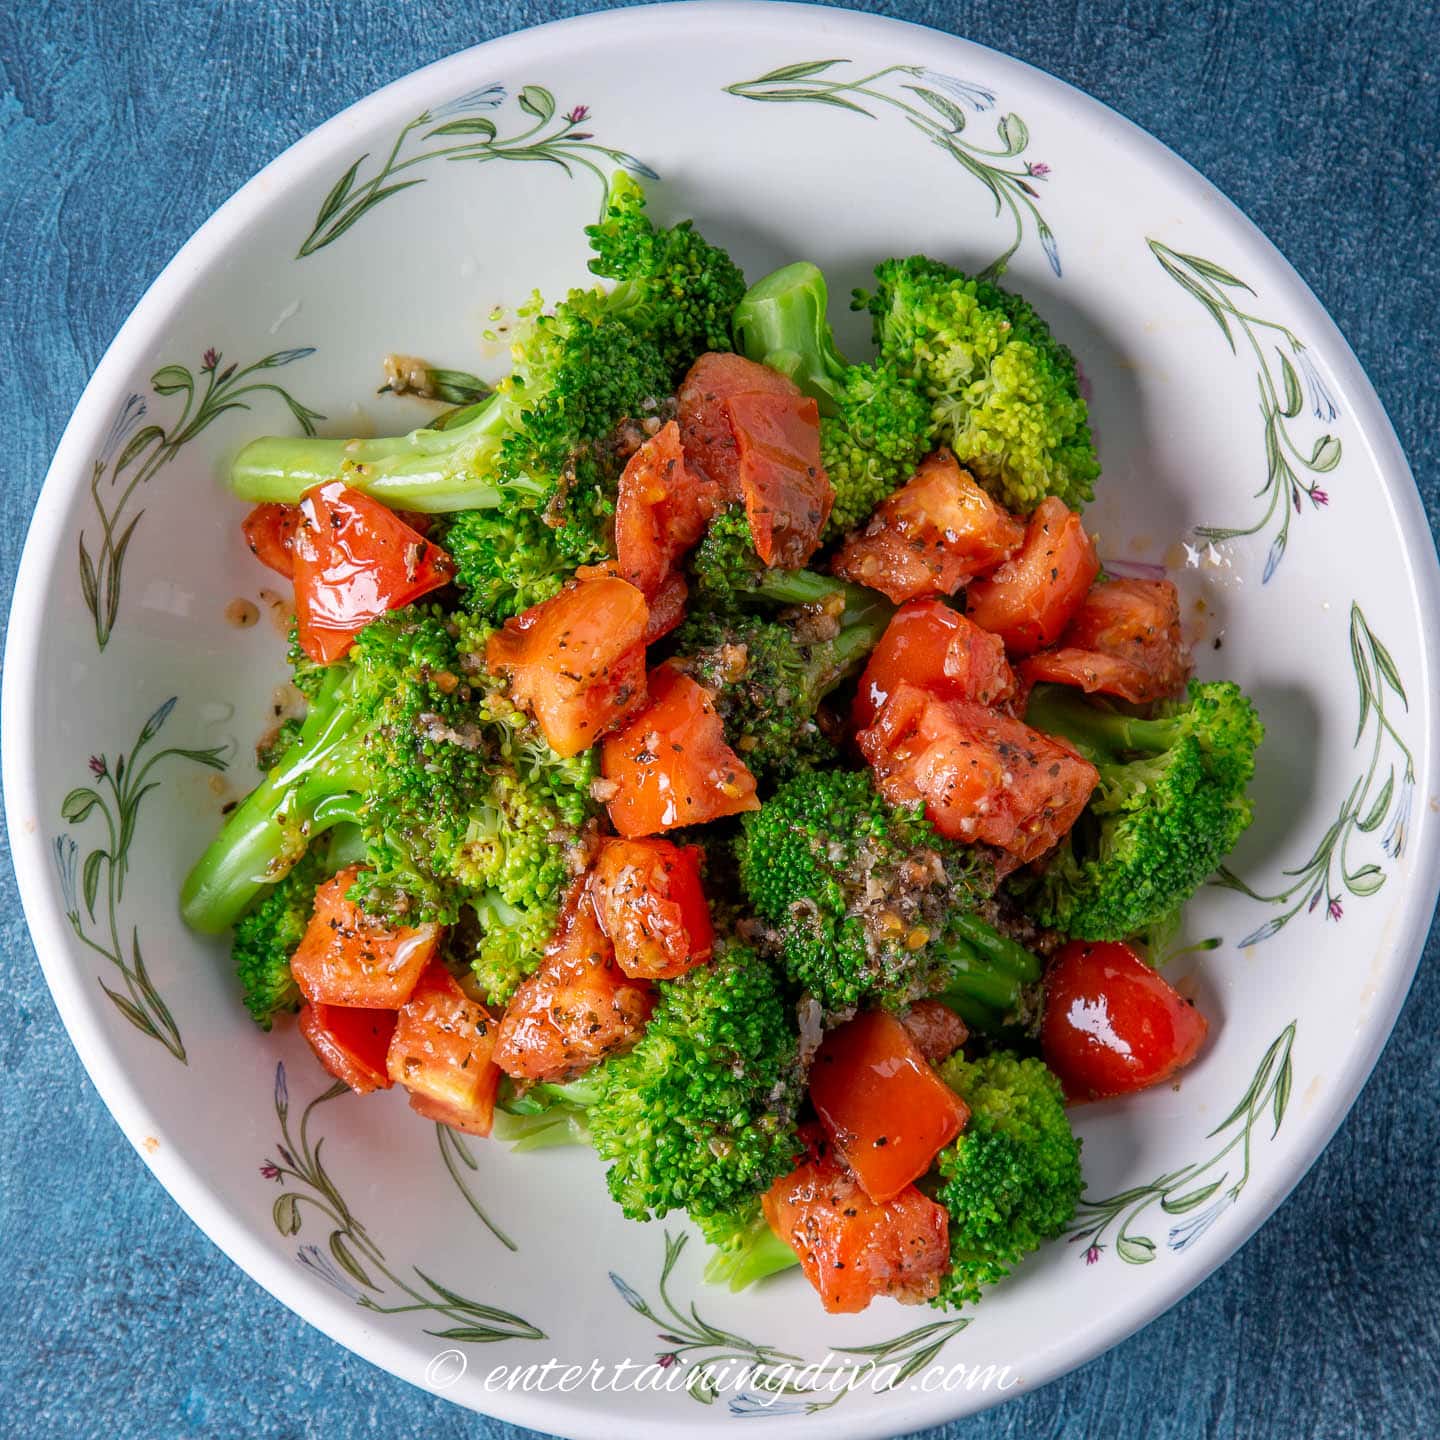 Overhead view of microwaved broccoli with tomatoes and spices in a serving bowl